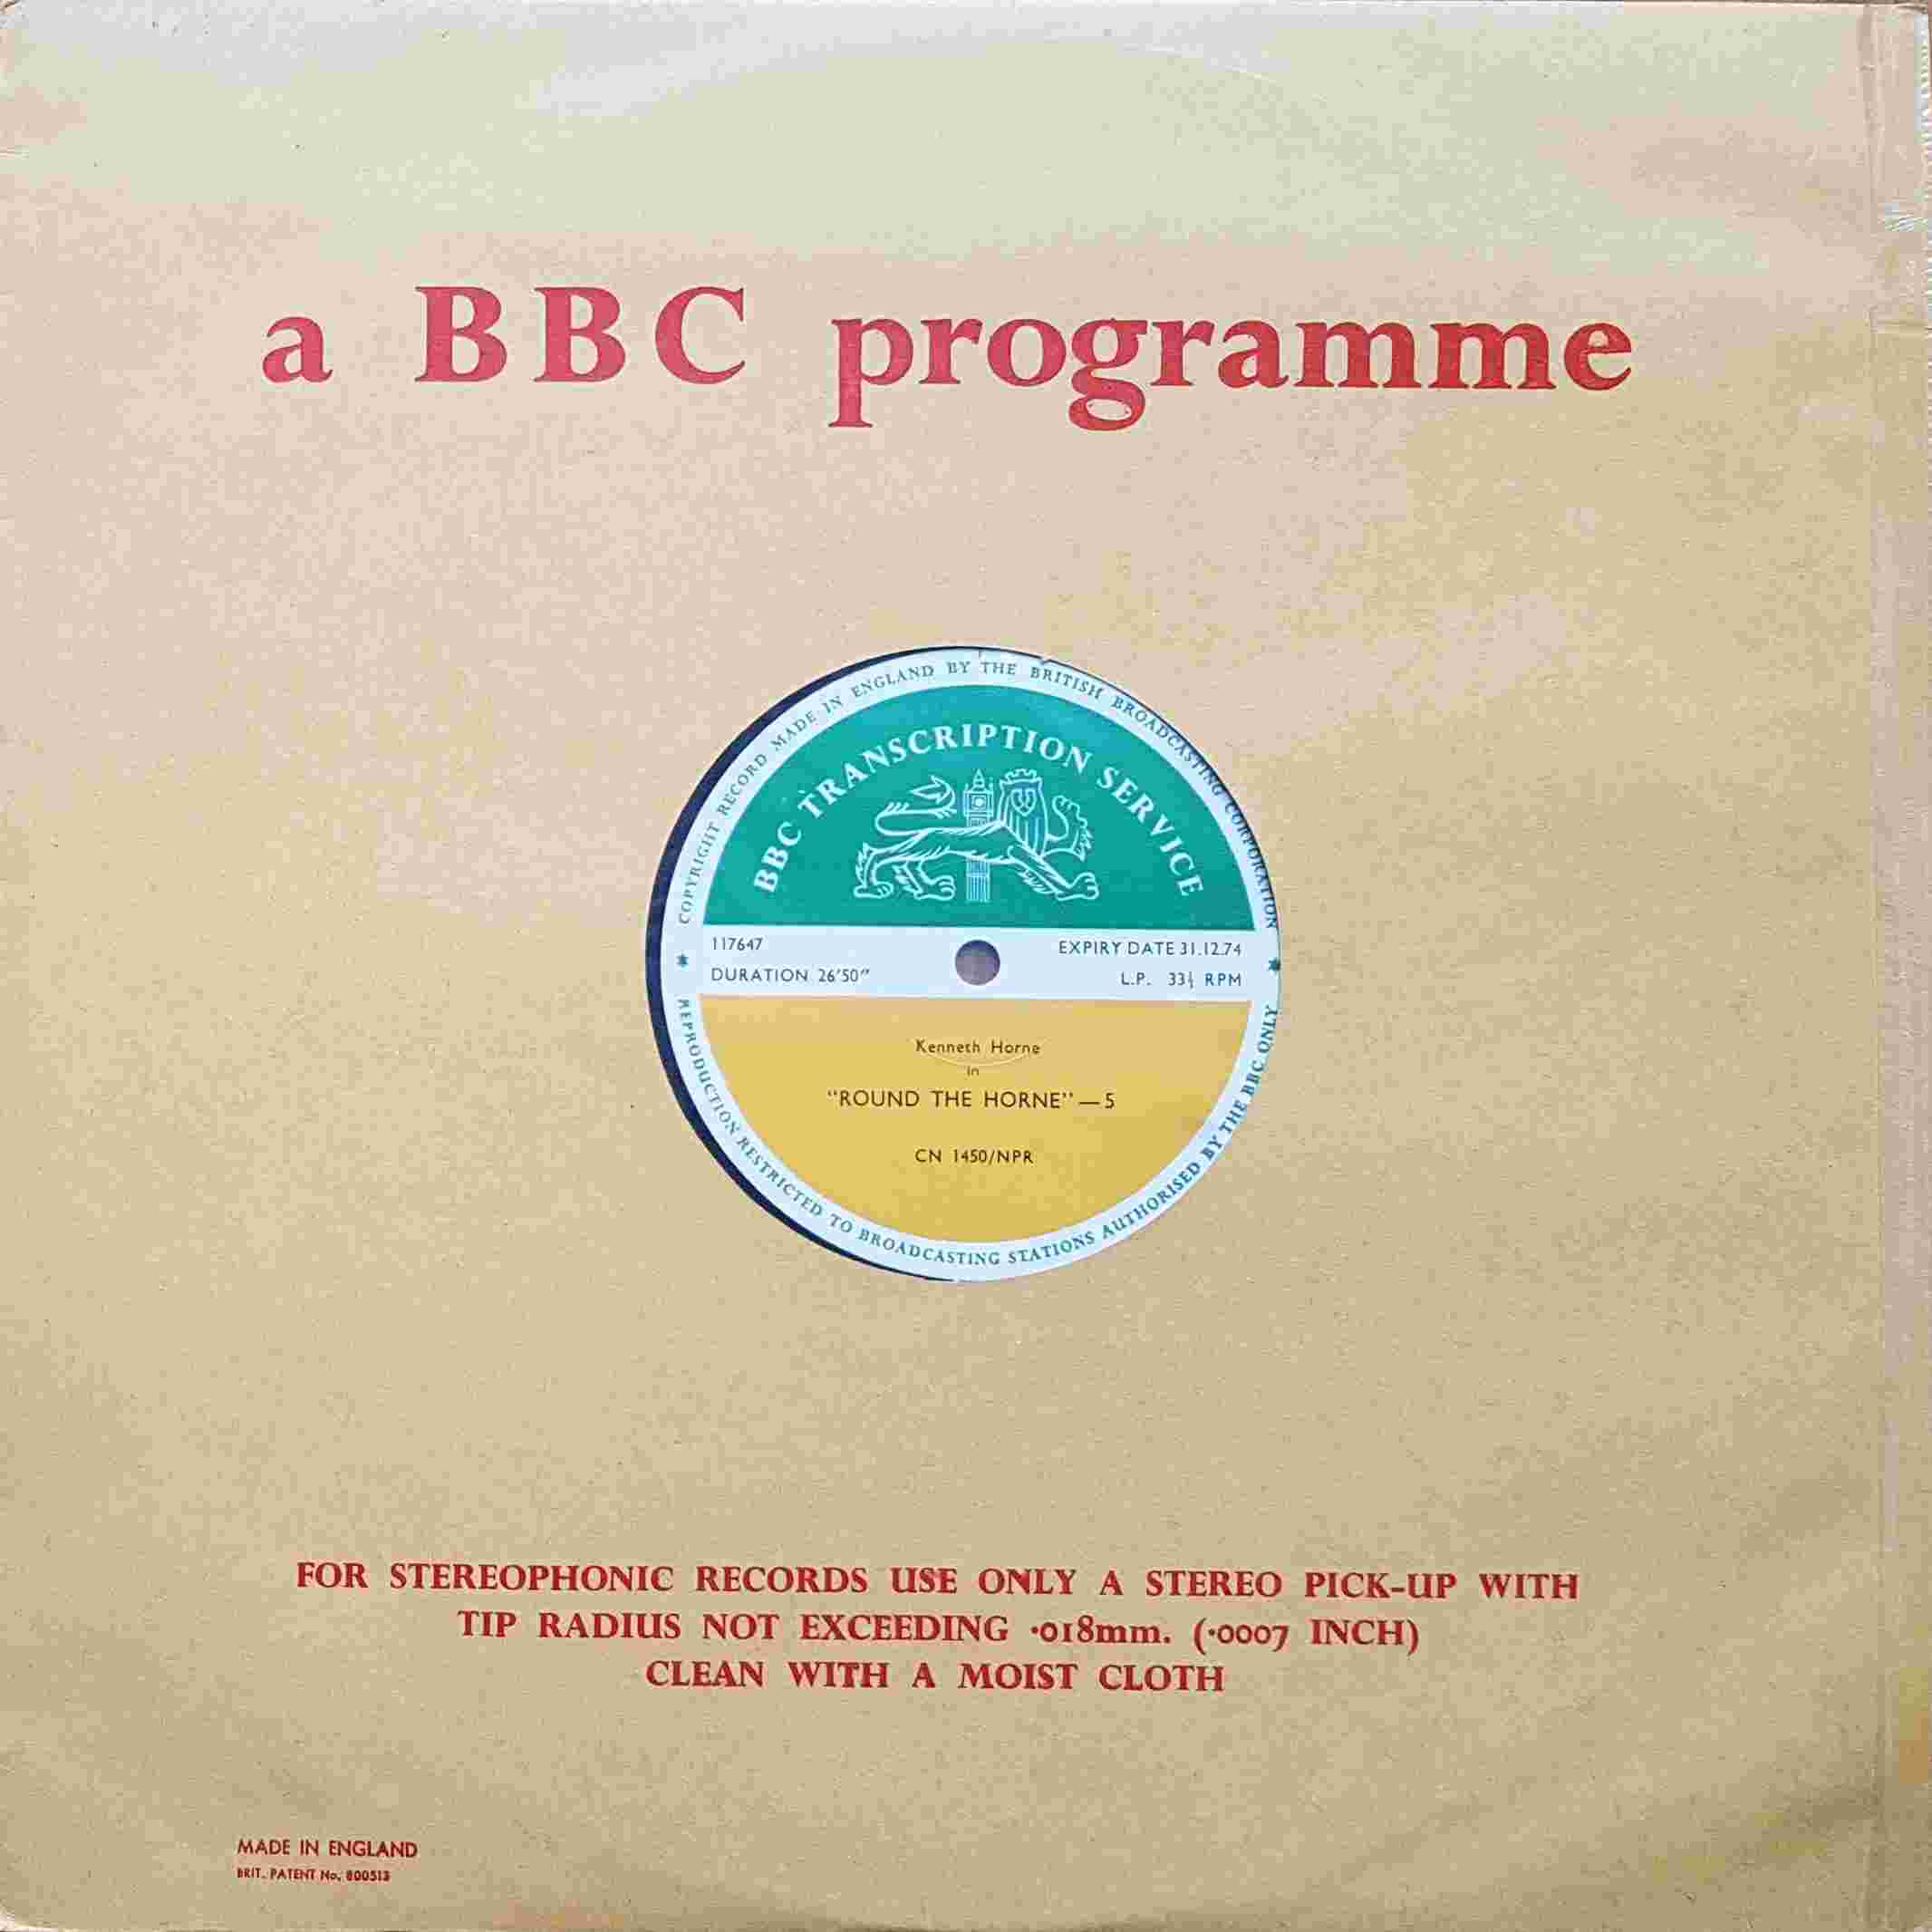 Picture of CN 1450 NPR 3 Round the Horne - 5 & 6 by artist Kenneth Horne from the BBC records and Tapes library